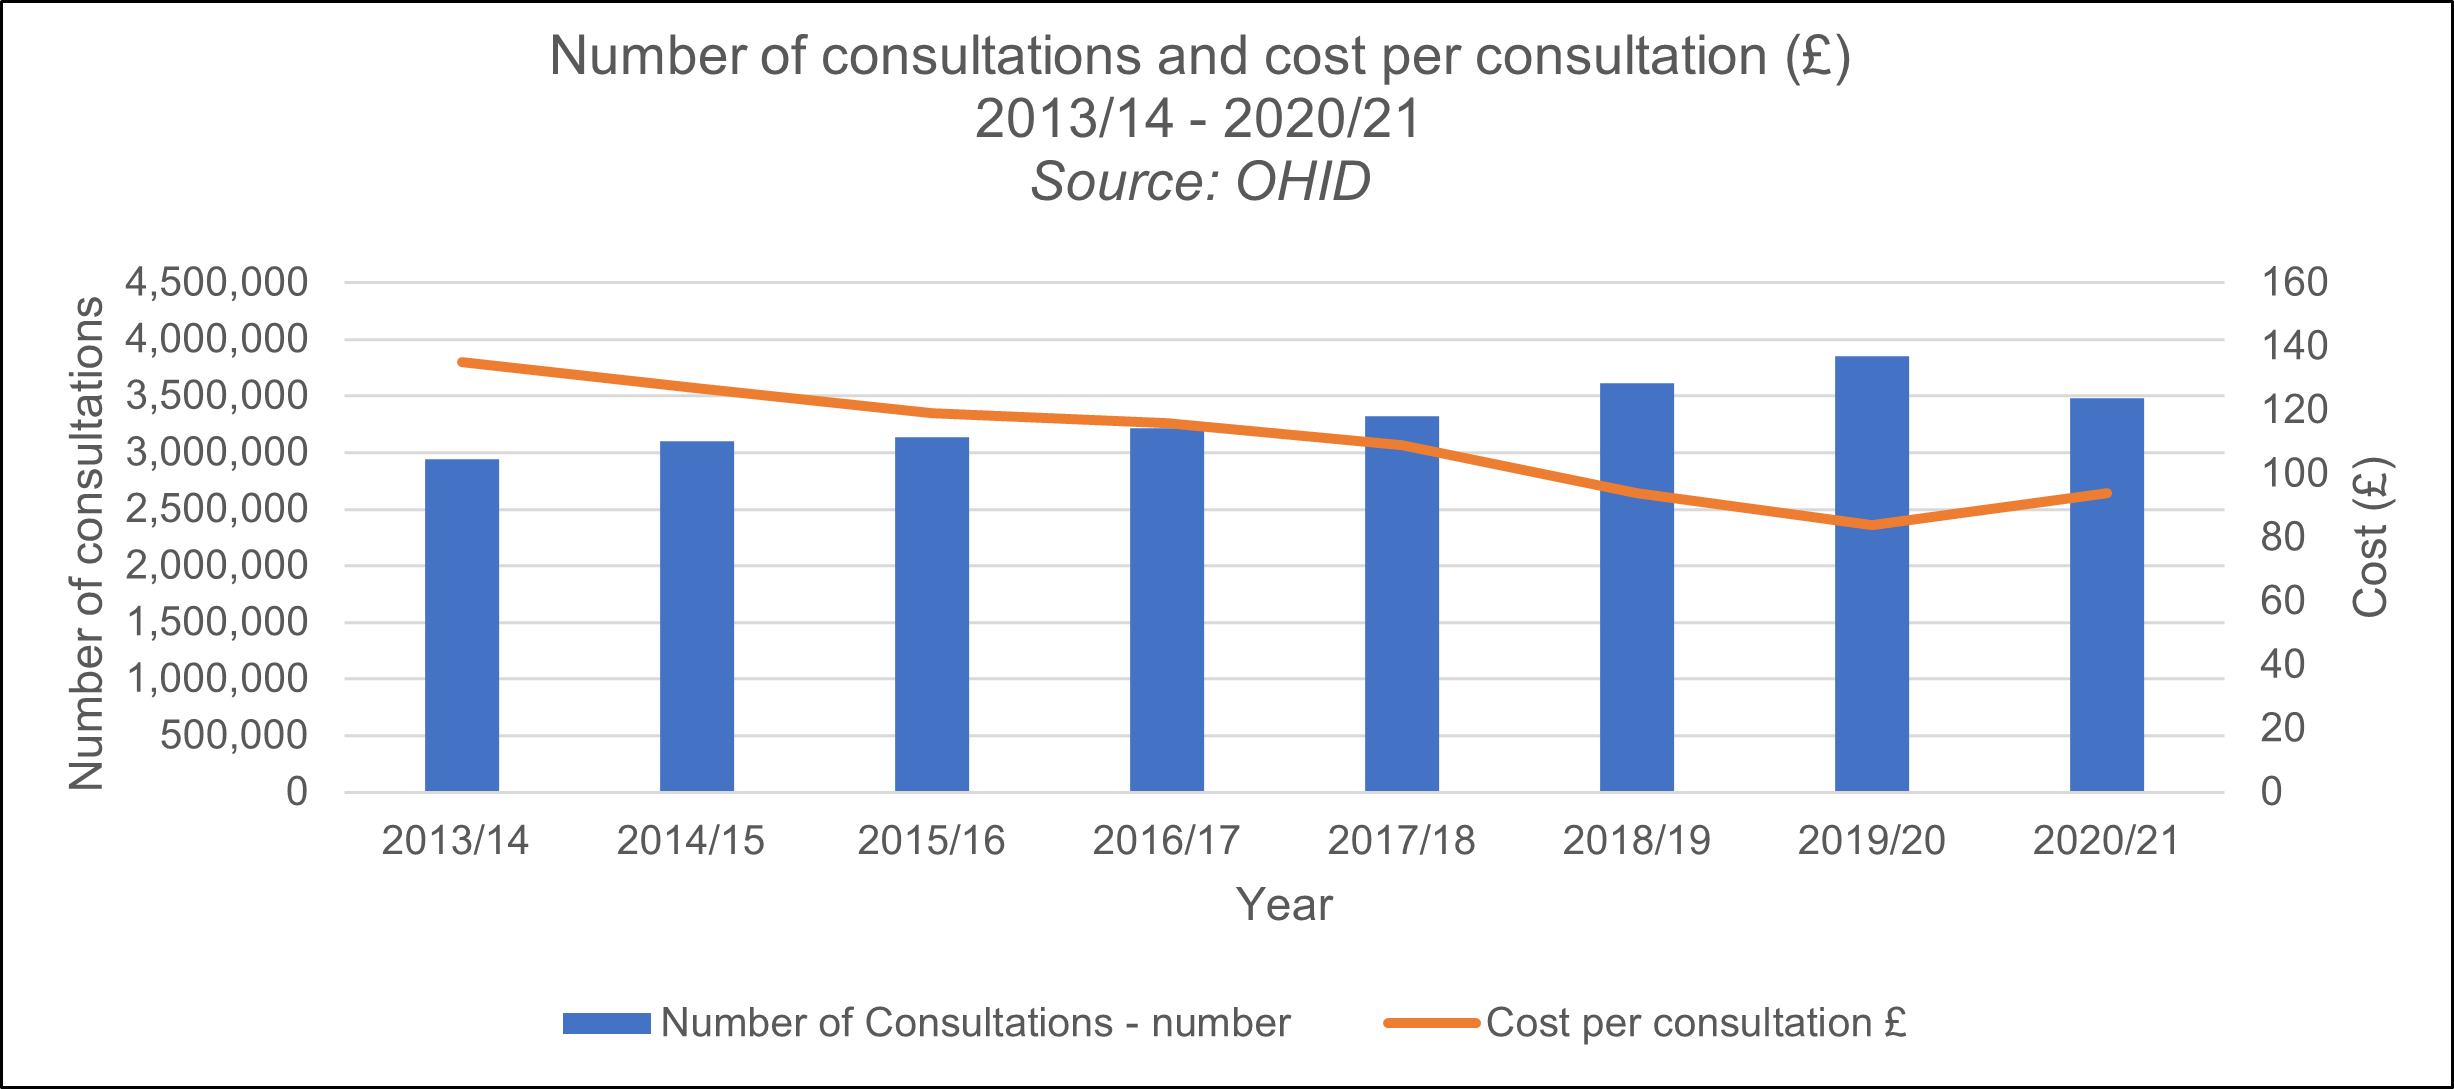 The cost per consultation has fallen from £135 in 2013/14 to £94 in 2020/21. There were 2,941,000 consultations in 2013/14, rising to 3,853,000 in 2019/20 and falling to 3,482,000 in 2020/21. 